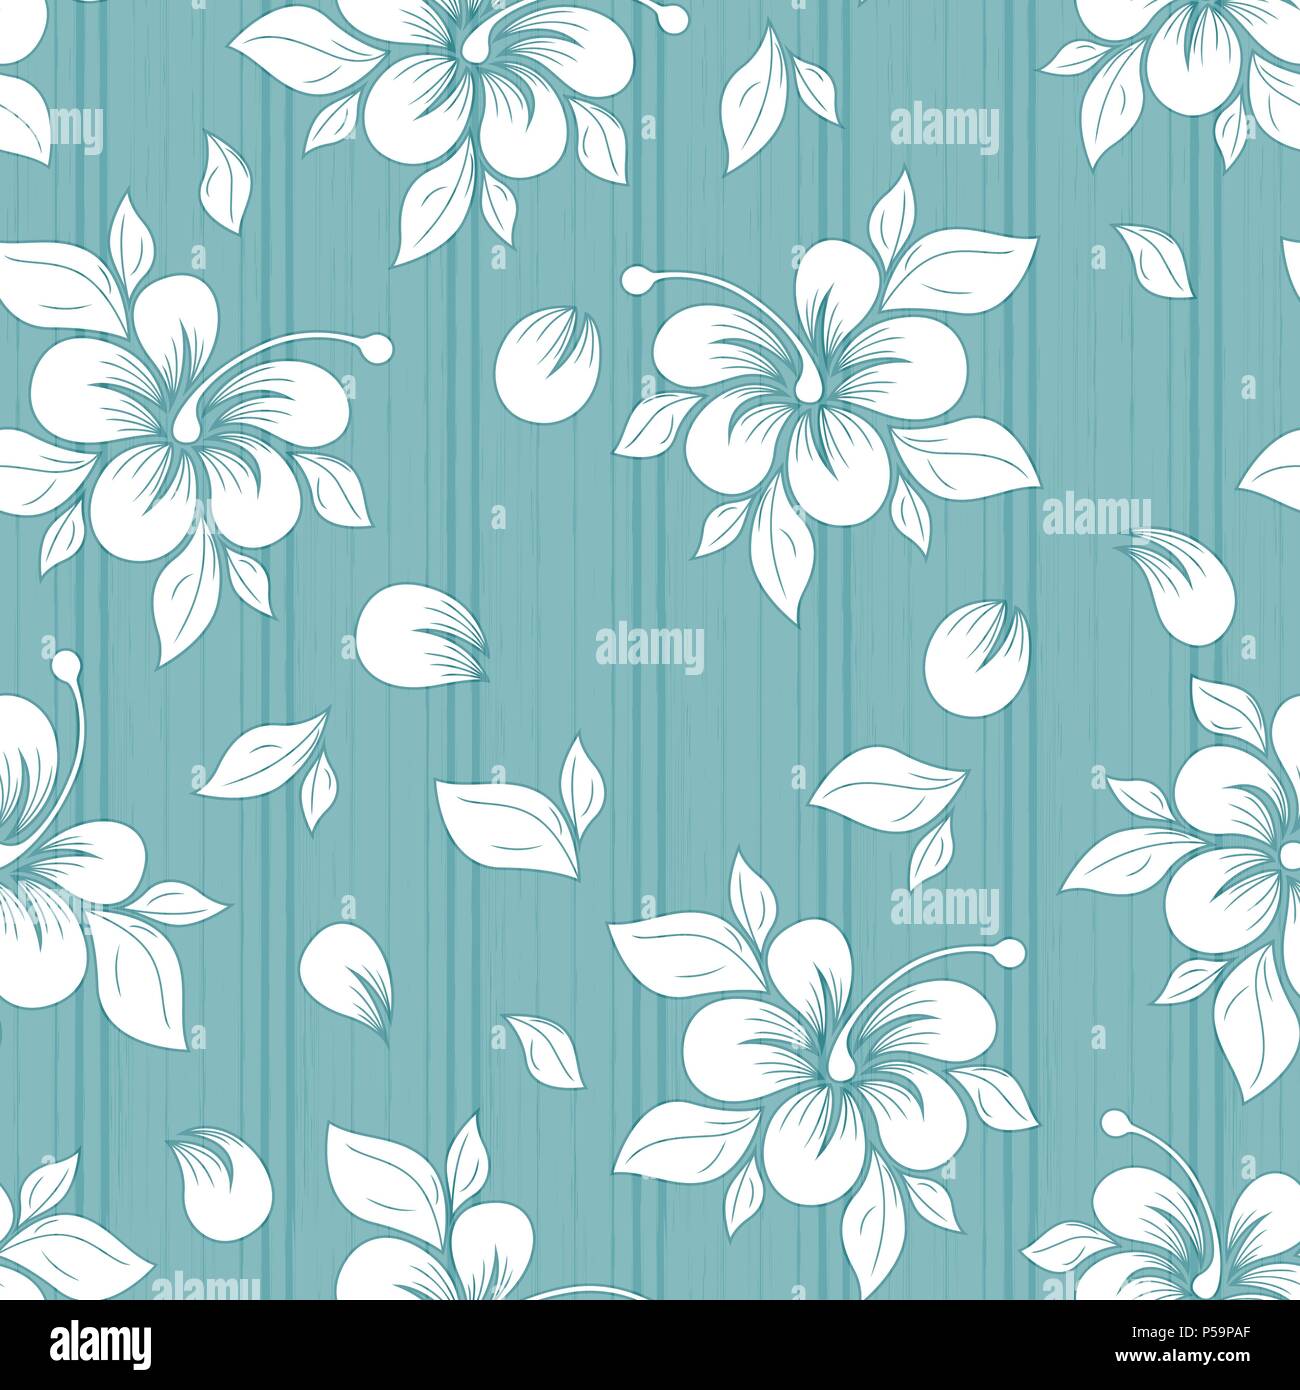 Trendy Seamless Floral Pattern Fabric Design With Simple Flowers